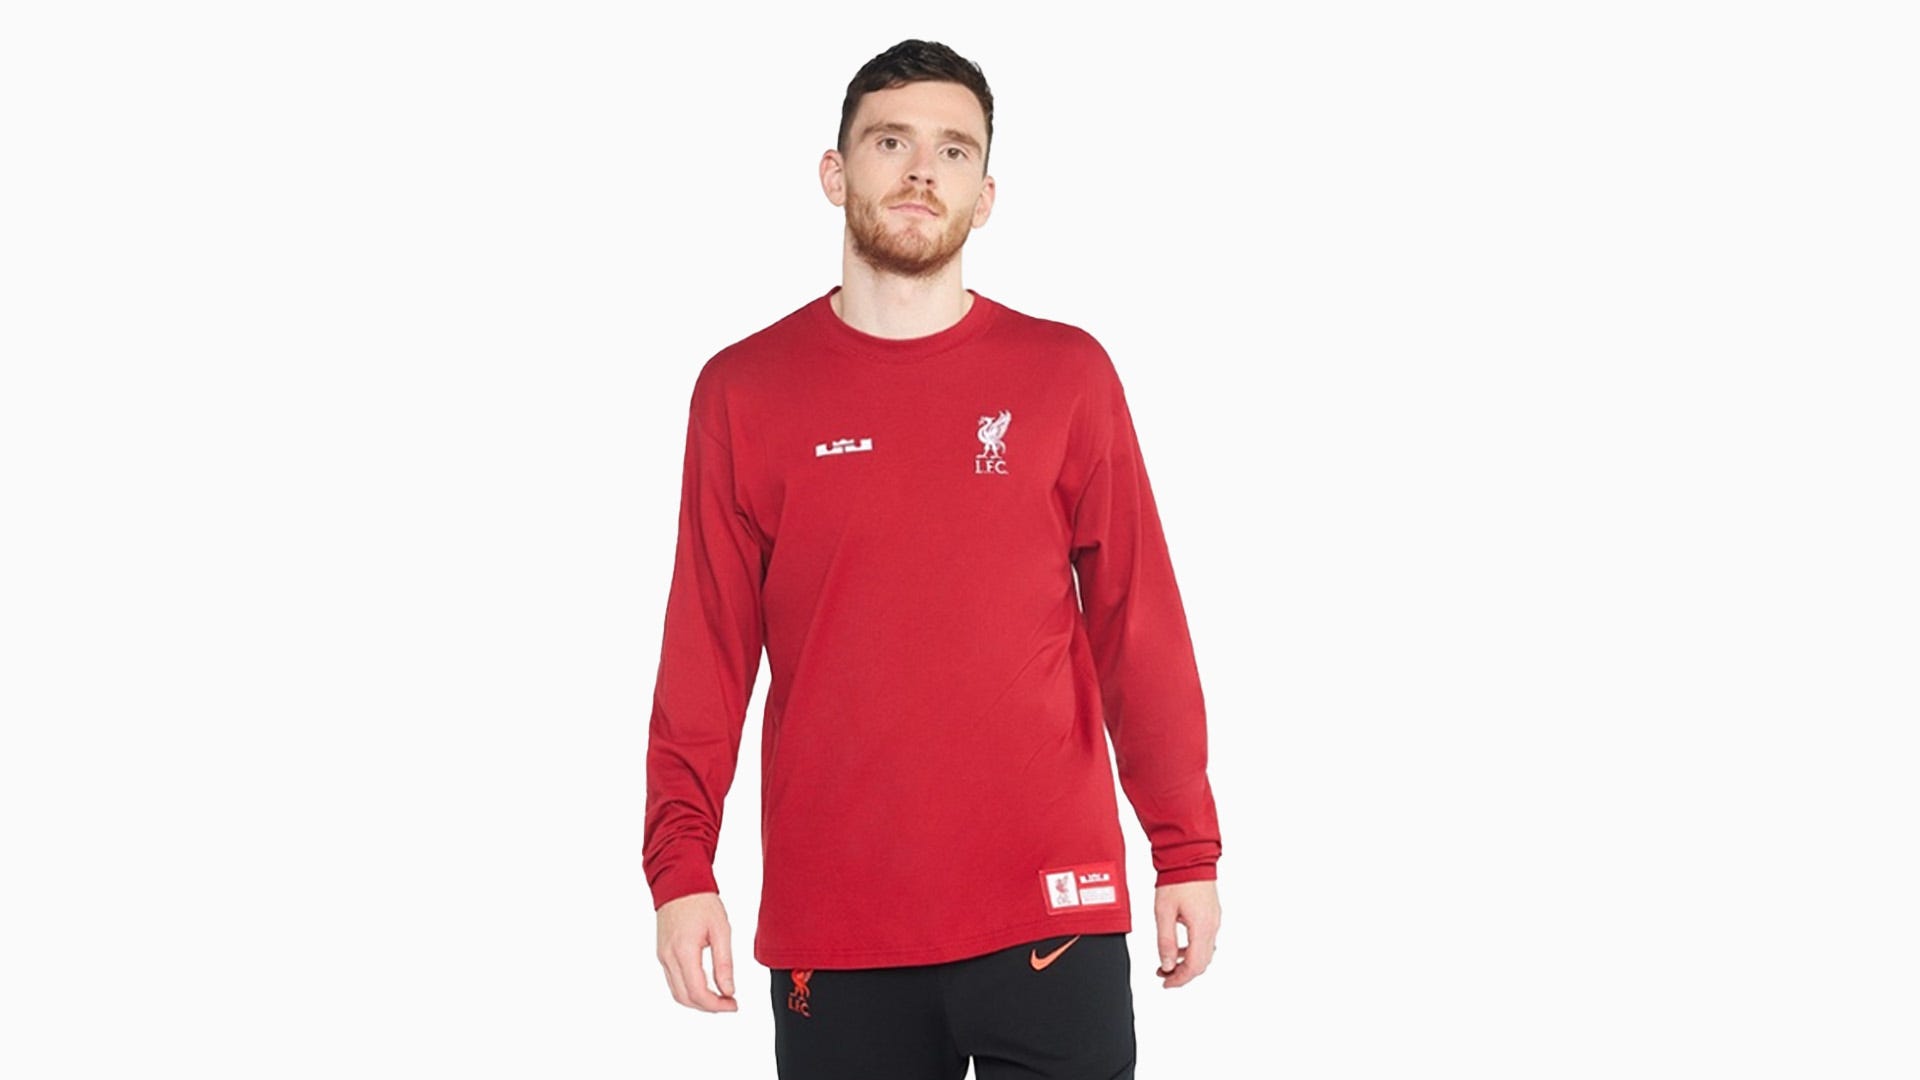 Liverpool team up with LeBron james for an iconic collection